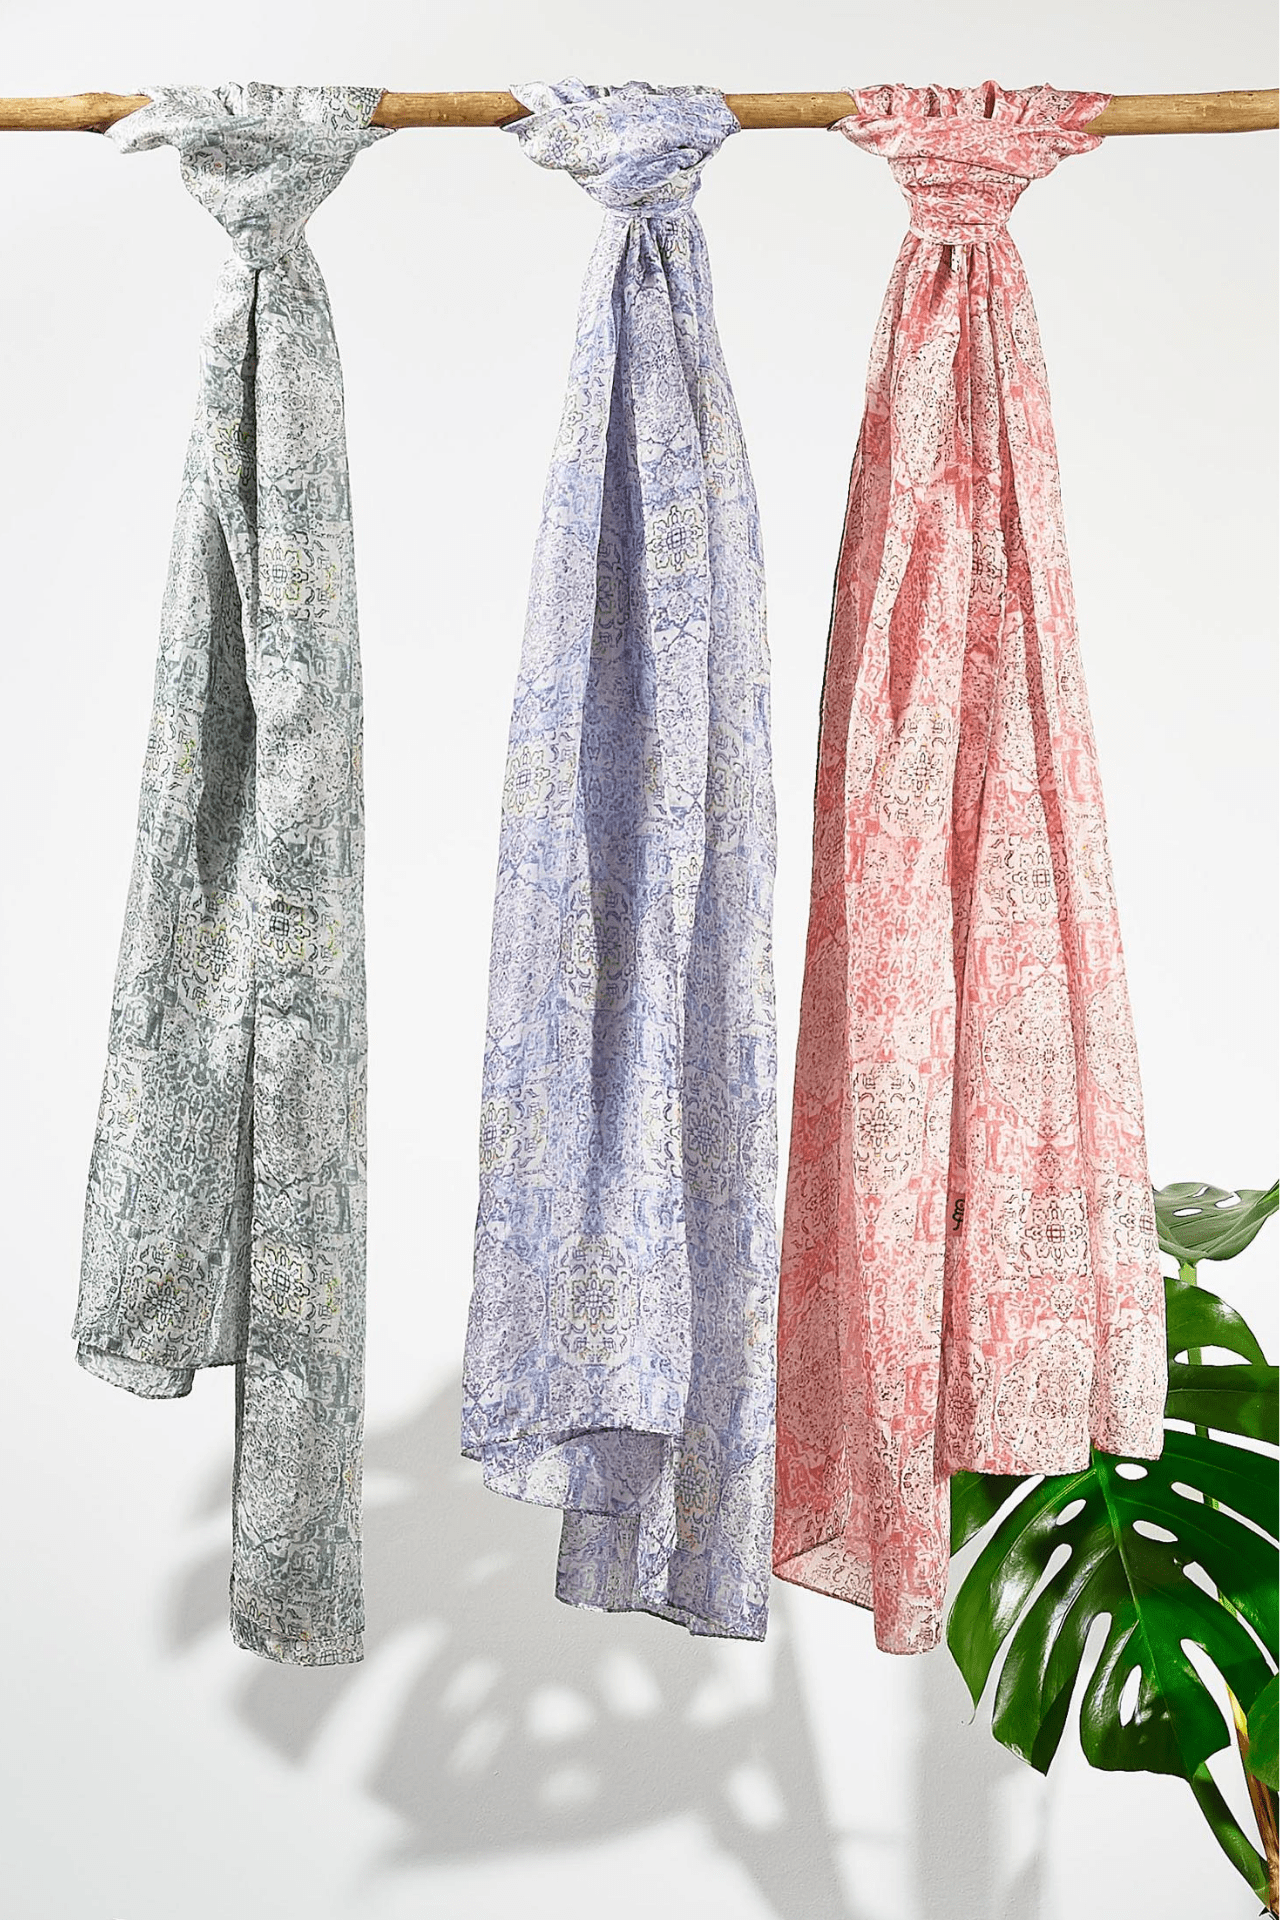 All three swatches of the scarves next to each other showing the colour difference